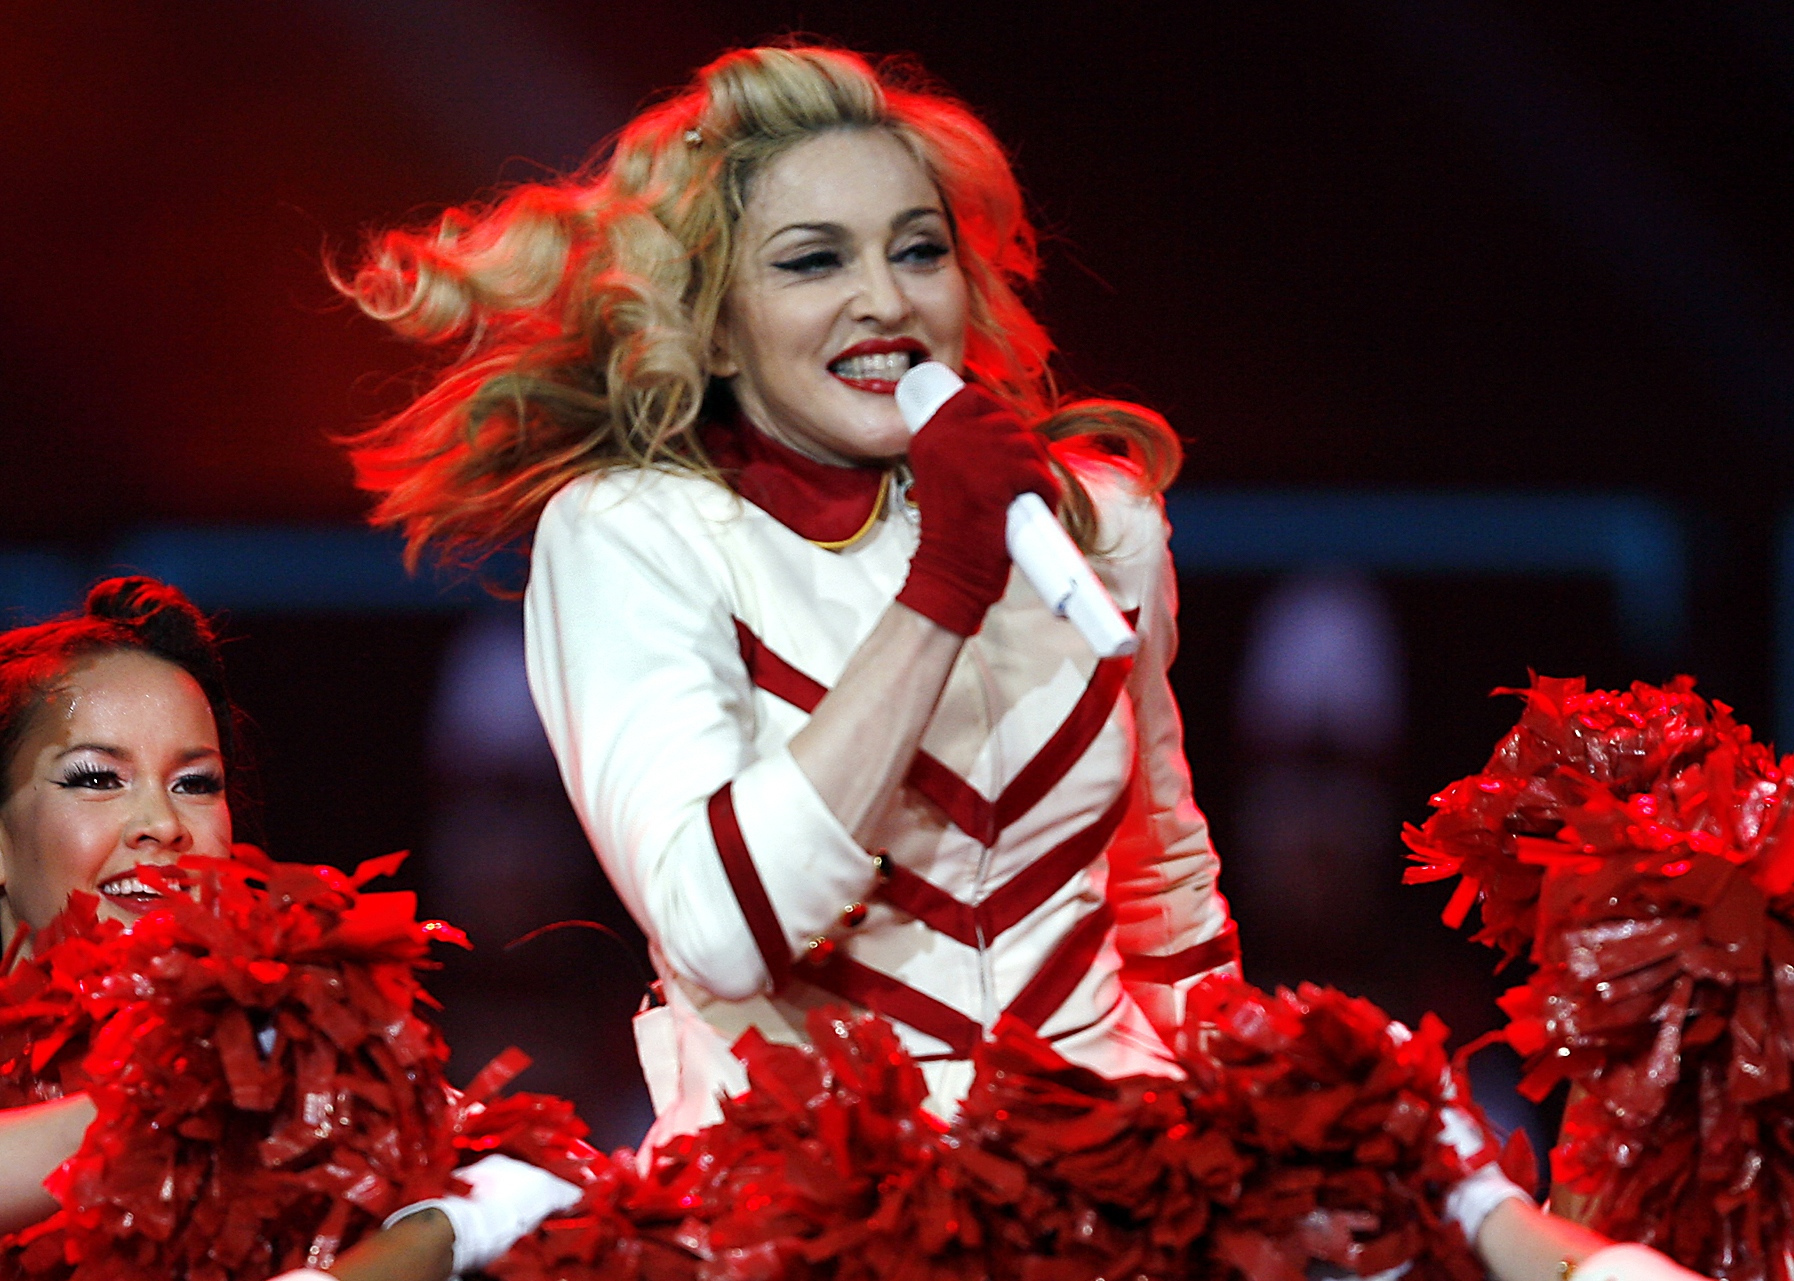 FILE - In this Nov. 8, 2012, file photo, Madonna performs at the Joe Louis Arena in Detroit. Madonna, who was 